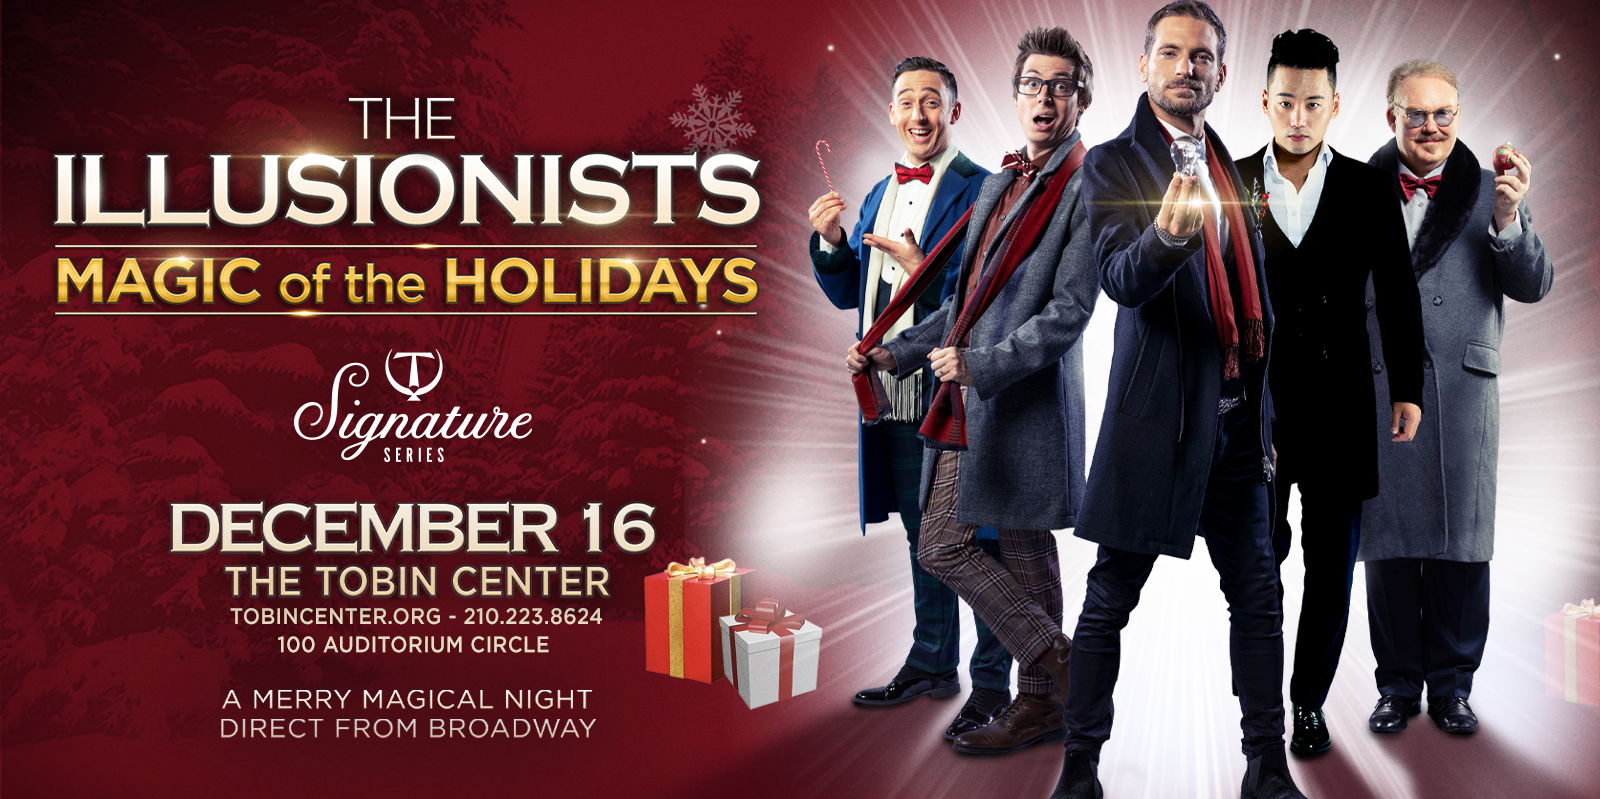 The Illusionists - Magic of the Holidays promotional image